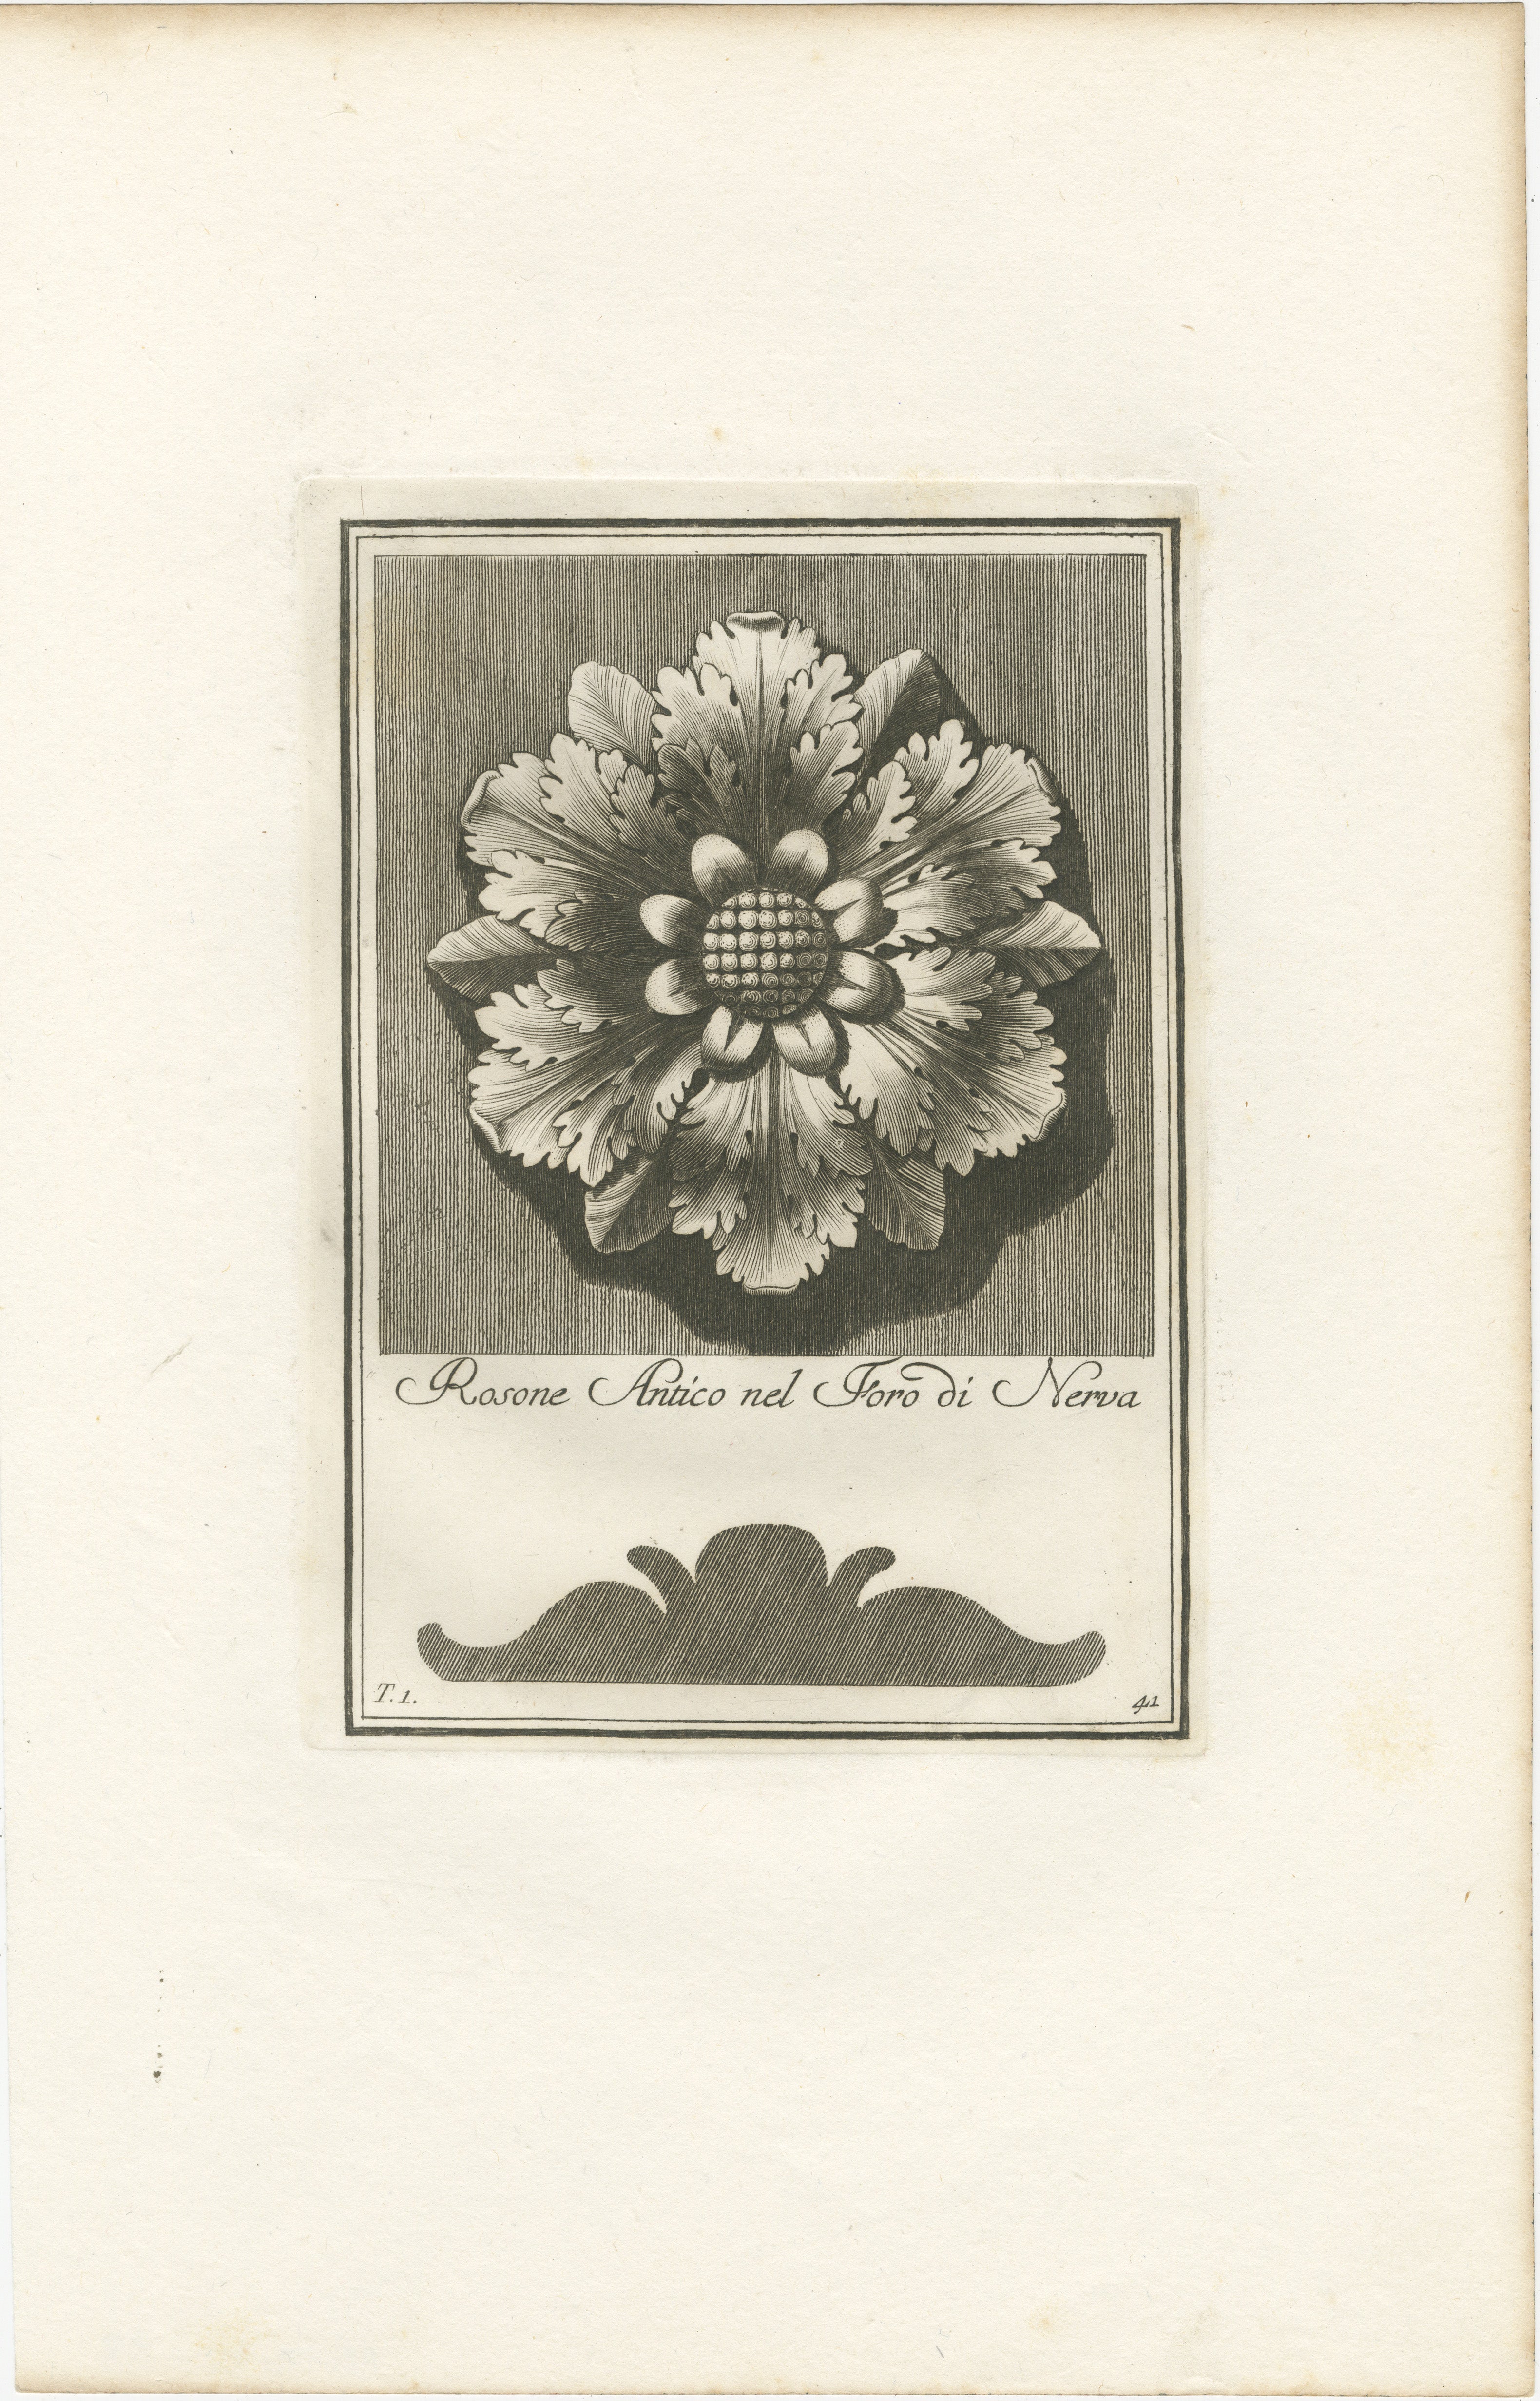 A fine example of an 18th-century botanical engraving. Created by Carlo Antonini between 1777 and 1790, it showcases a detailed depiction of a flower in full bloom. The illustration is highly detailed, with individual petals, stamens, and shading